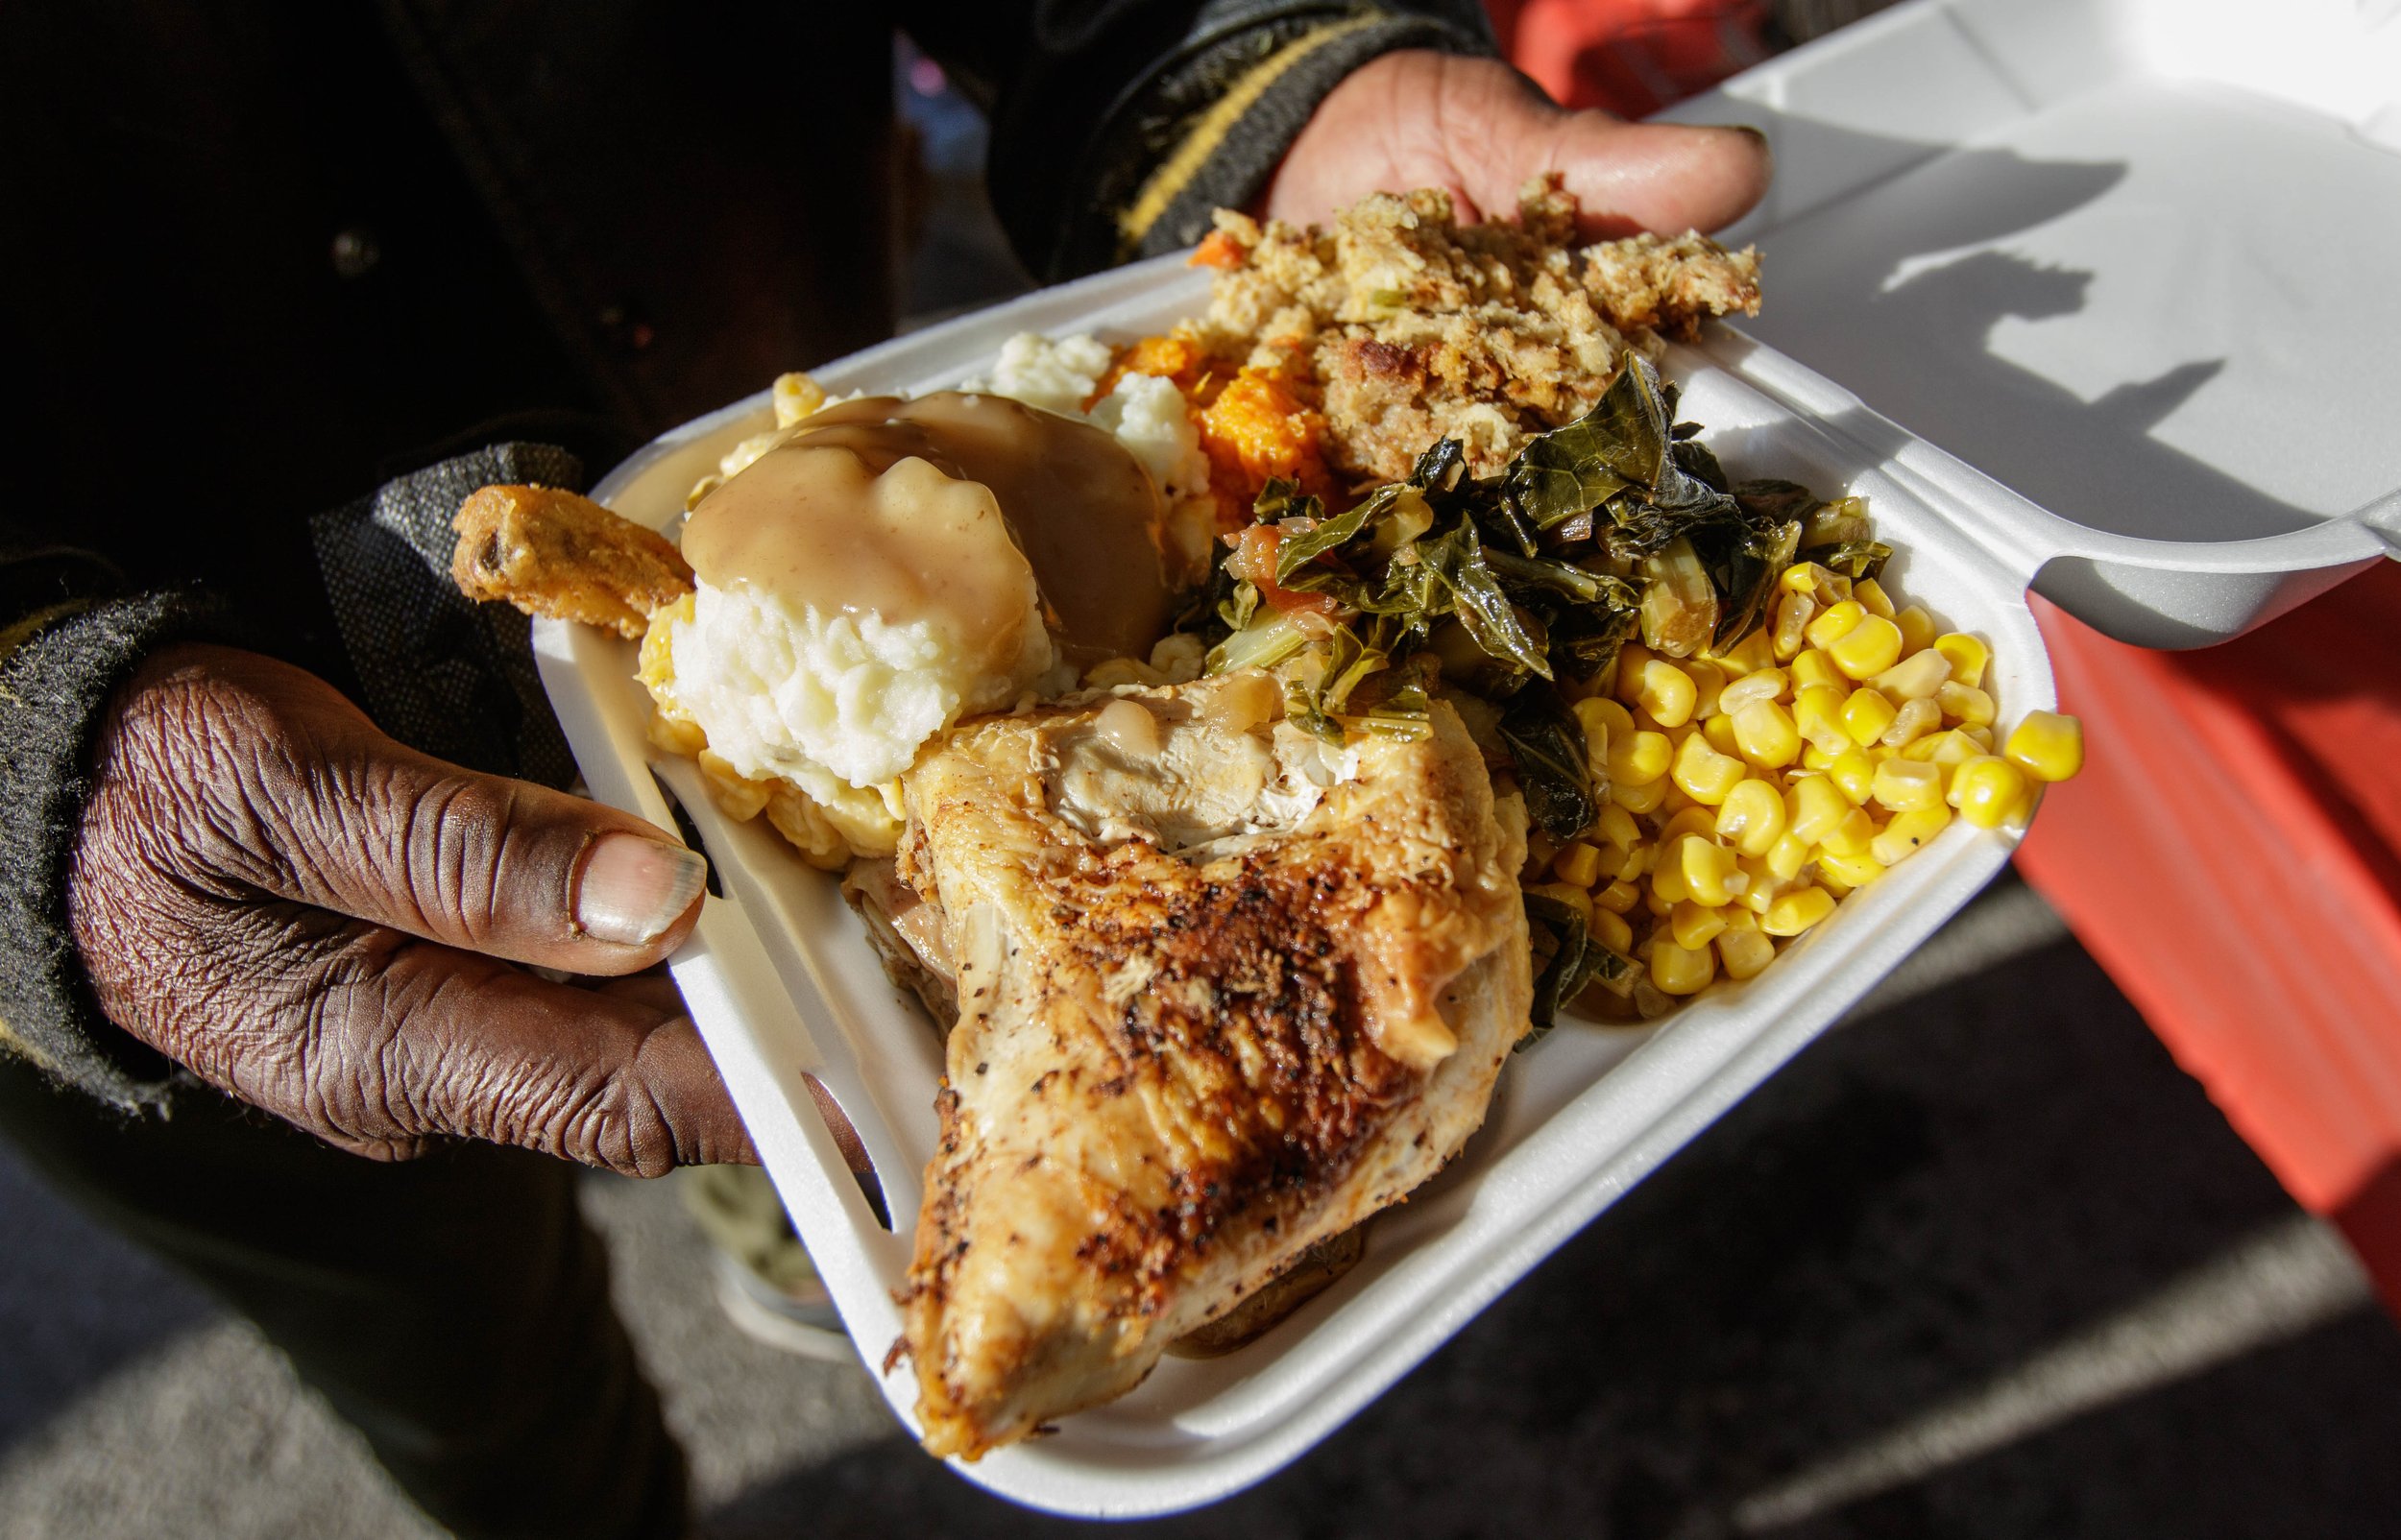  Receivers get the traditional Thanksgiving meal featuring chicken, corn, mashed potatoes and stuffing. All the meals are homecooked and donated by volunteers of the Lost Angels Org. For the past 10 years, Lost Angels Org the non profit based in Los 